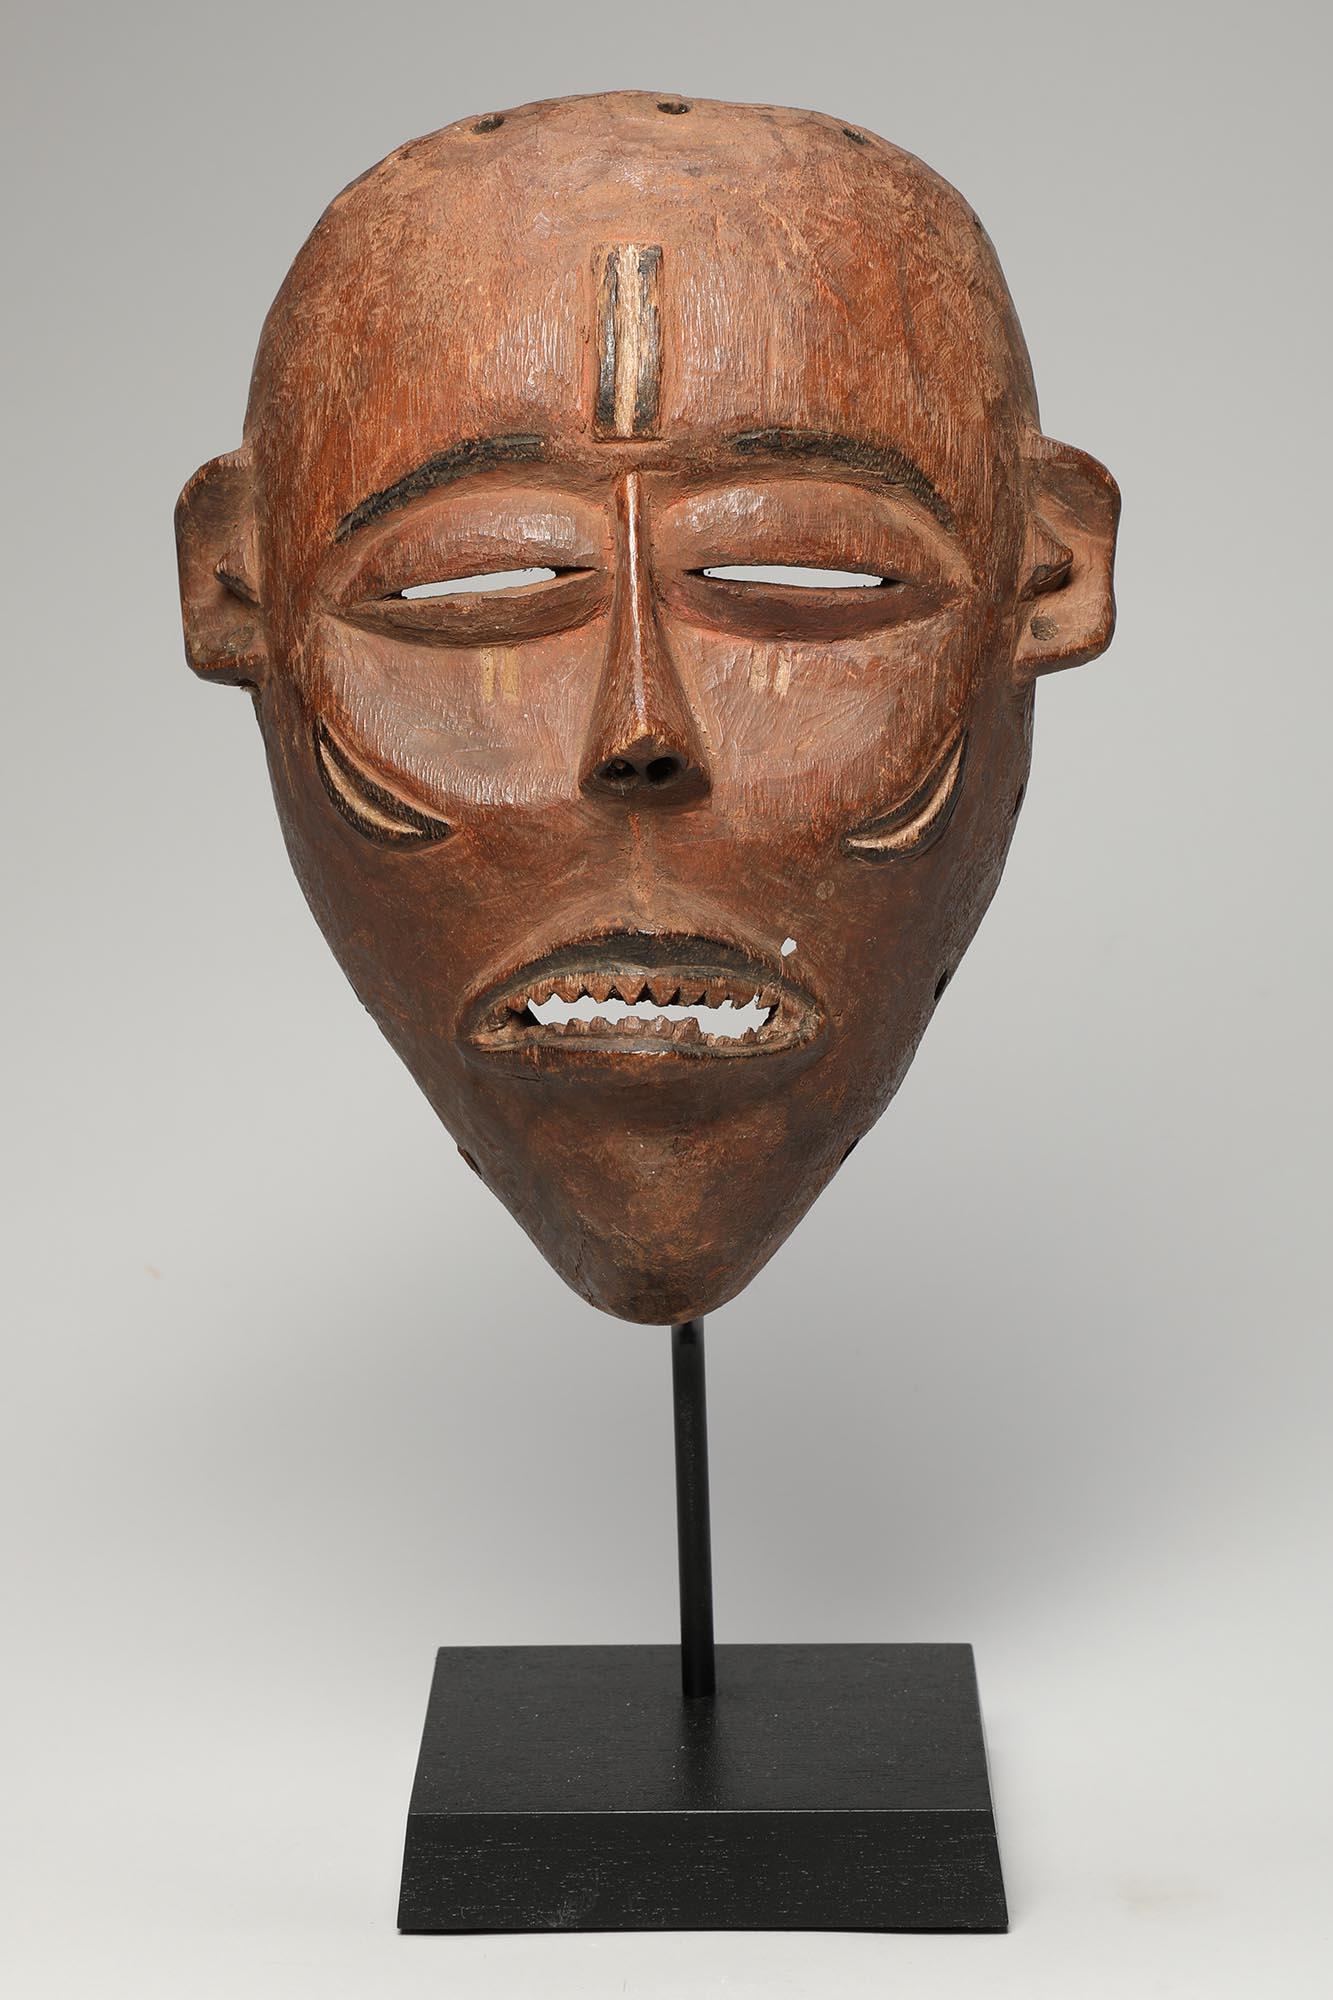 Finely carved hardwood mask from the Pende people of the Democratic Republic of Congo. Expressive, with finely carved open mouth and filed sharpened teeth. Raised scarification marks on forehead and cheeks. Small hole by mouth where the sculptor who